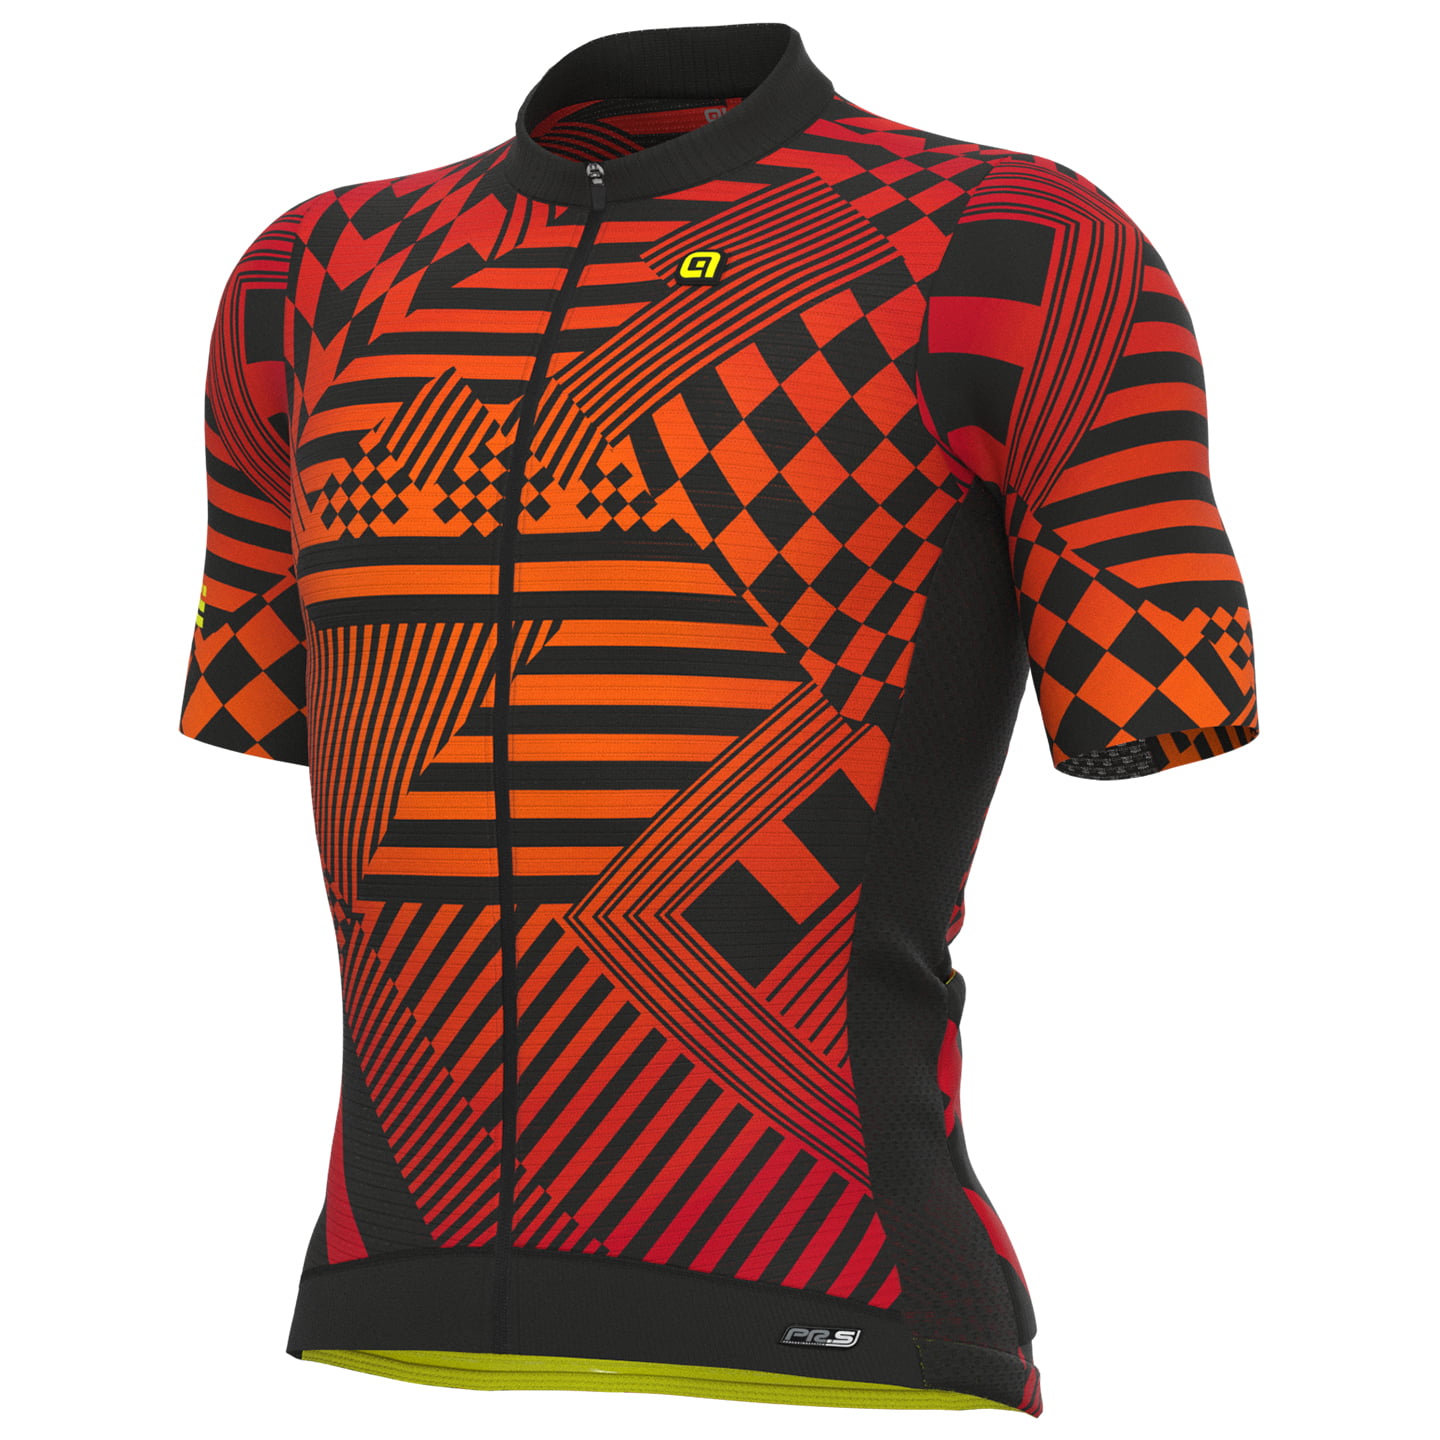 ALE Checkers Short Sleeve Jersey Short Sleeve Jersey, for men, size 2XL, Cycling jersey, Cycle clothing